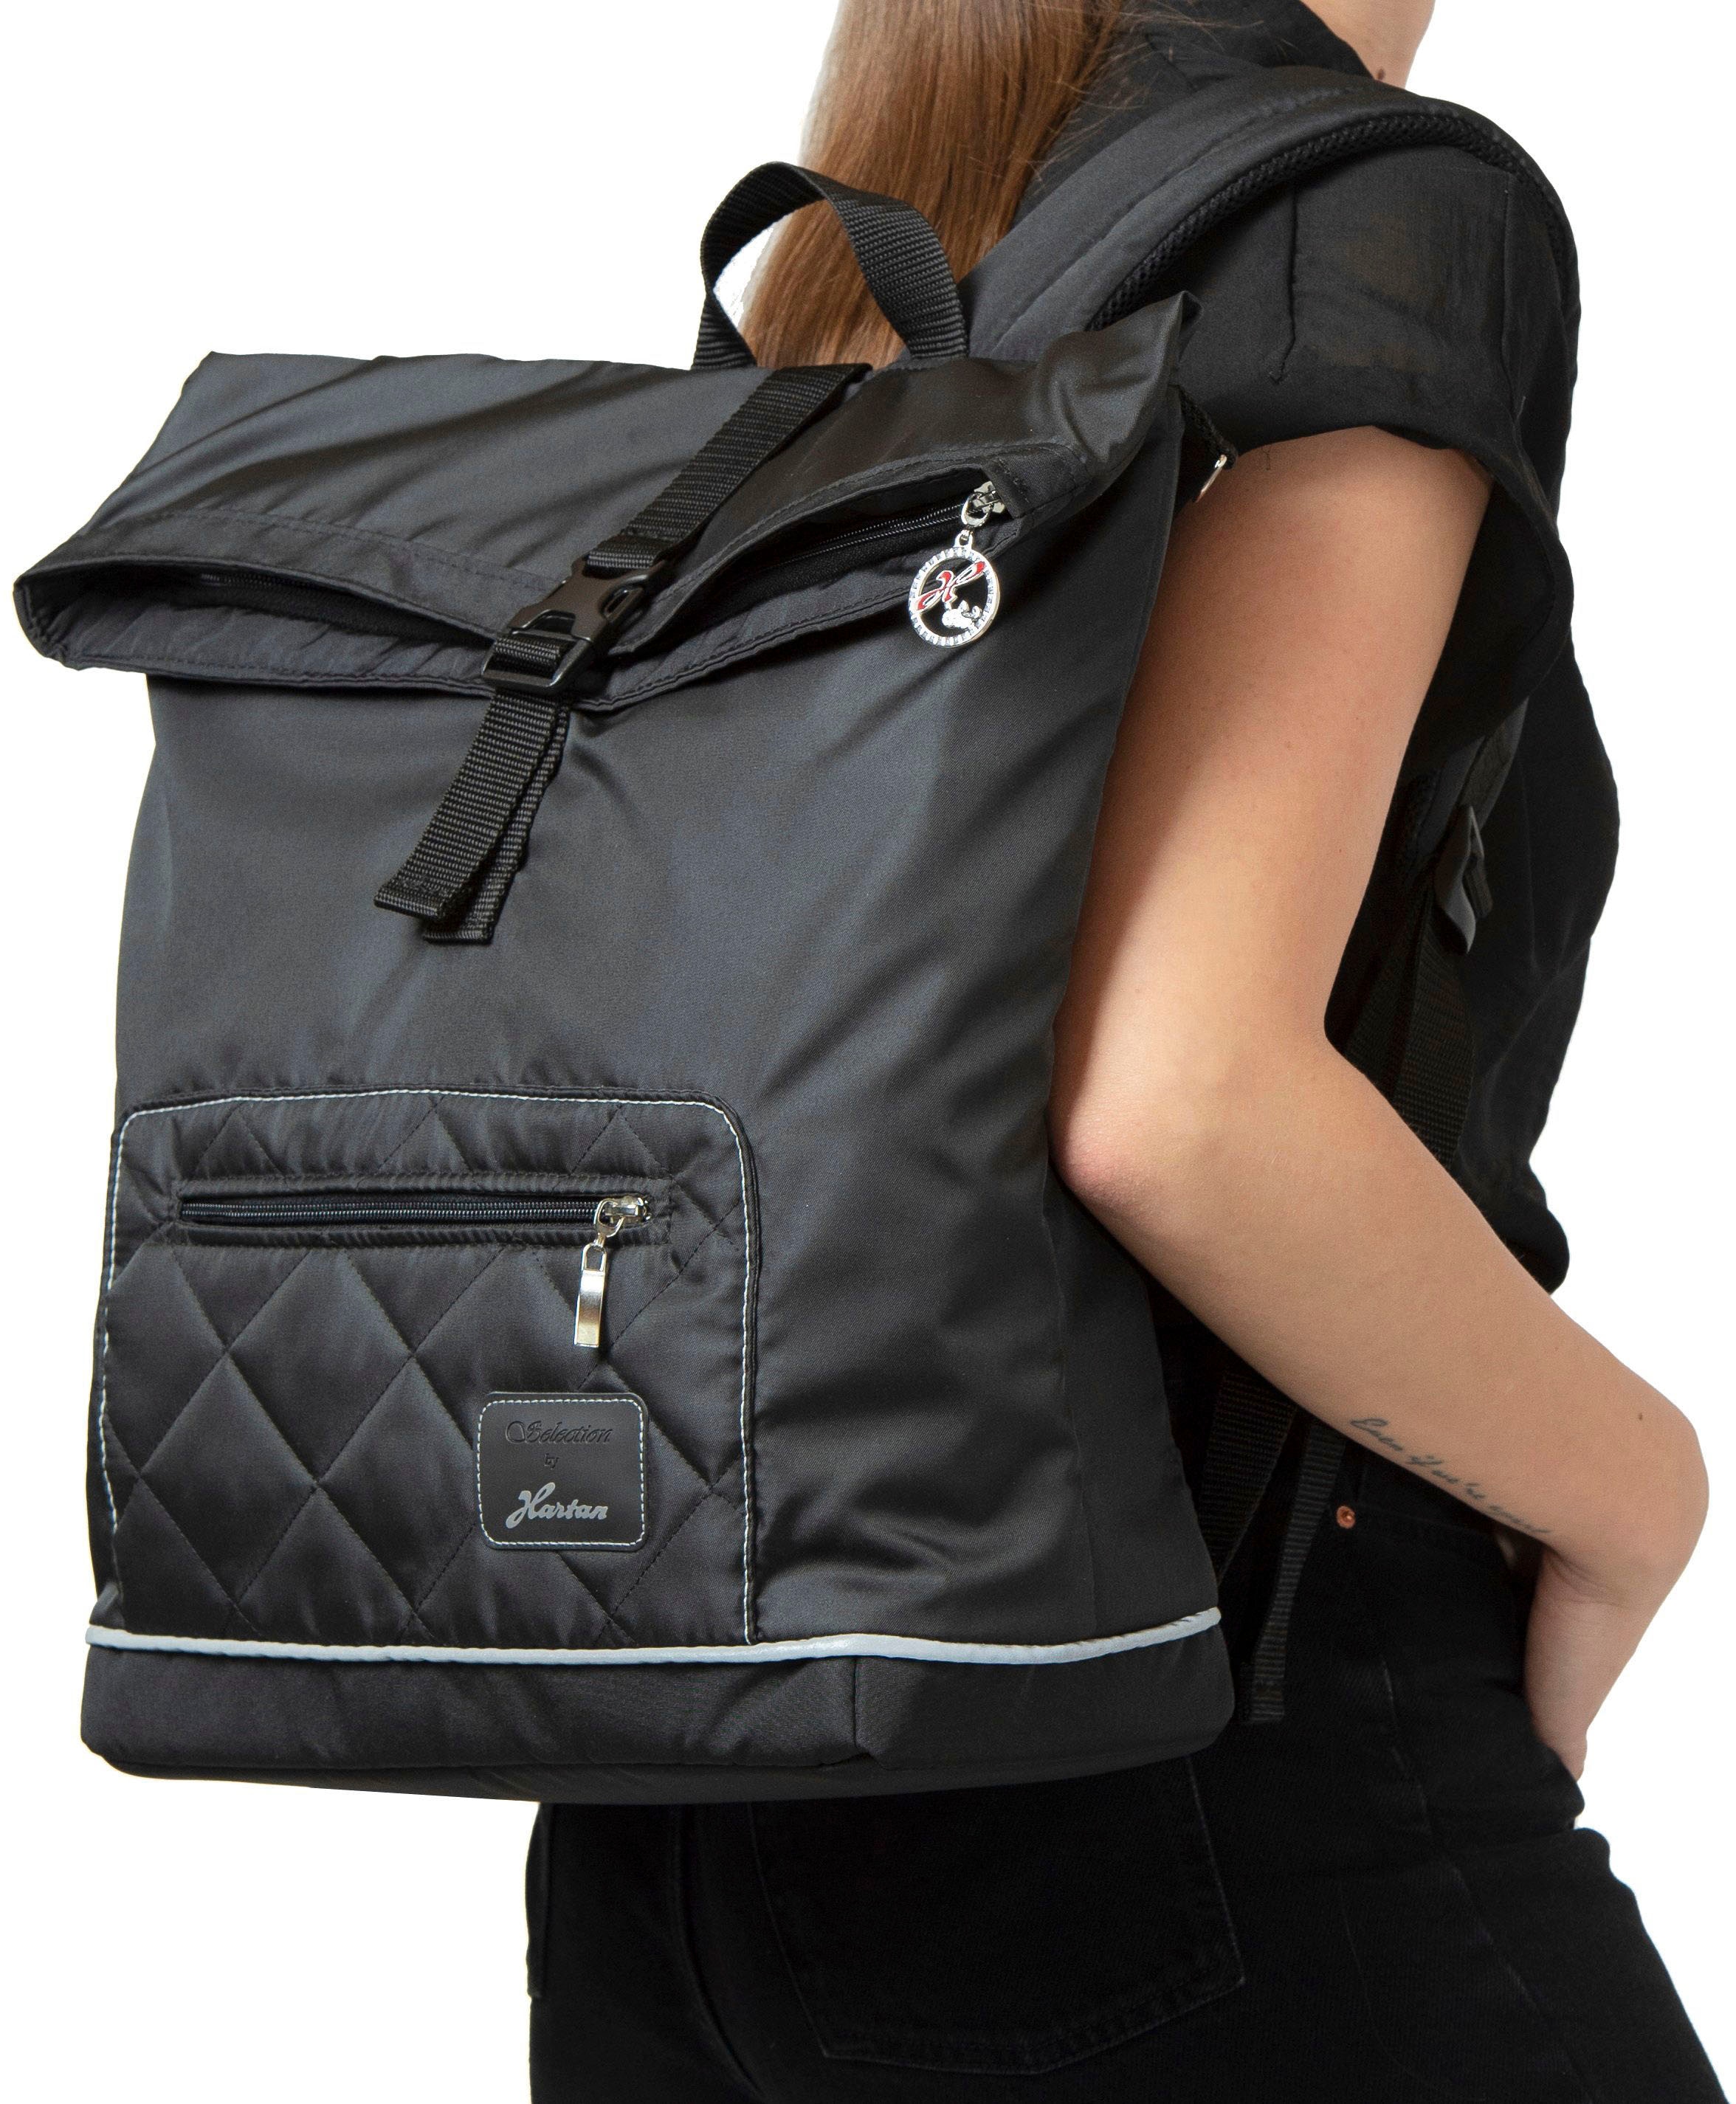 Hartan Wickelrucksack »Space bag in Made Germany mit - Thermofach; bestellen OTTO Collection«, bei Casual